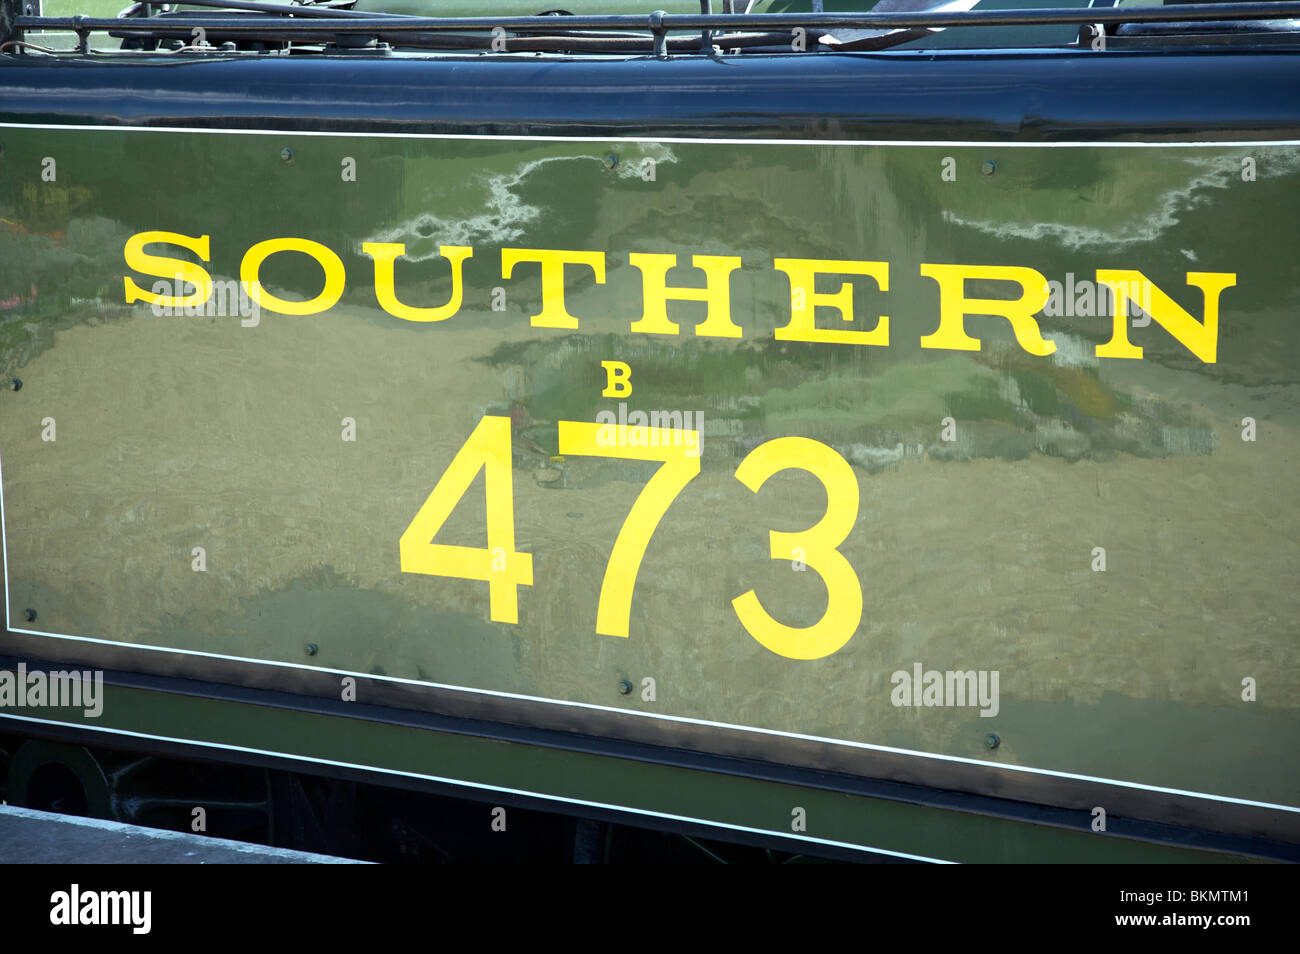 Southern 473 Railway Locomotive sign green and yellow Stock Photo